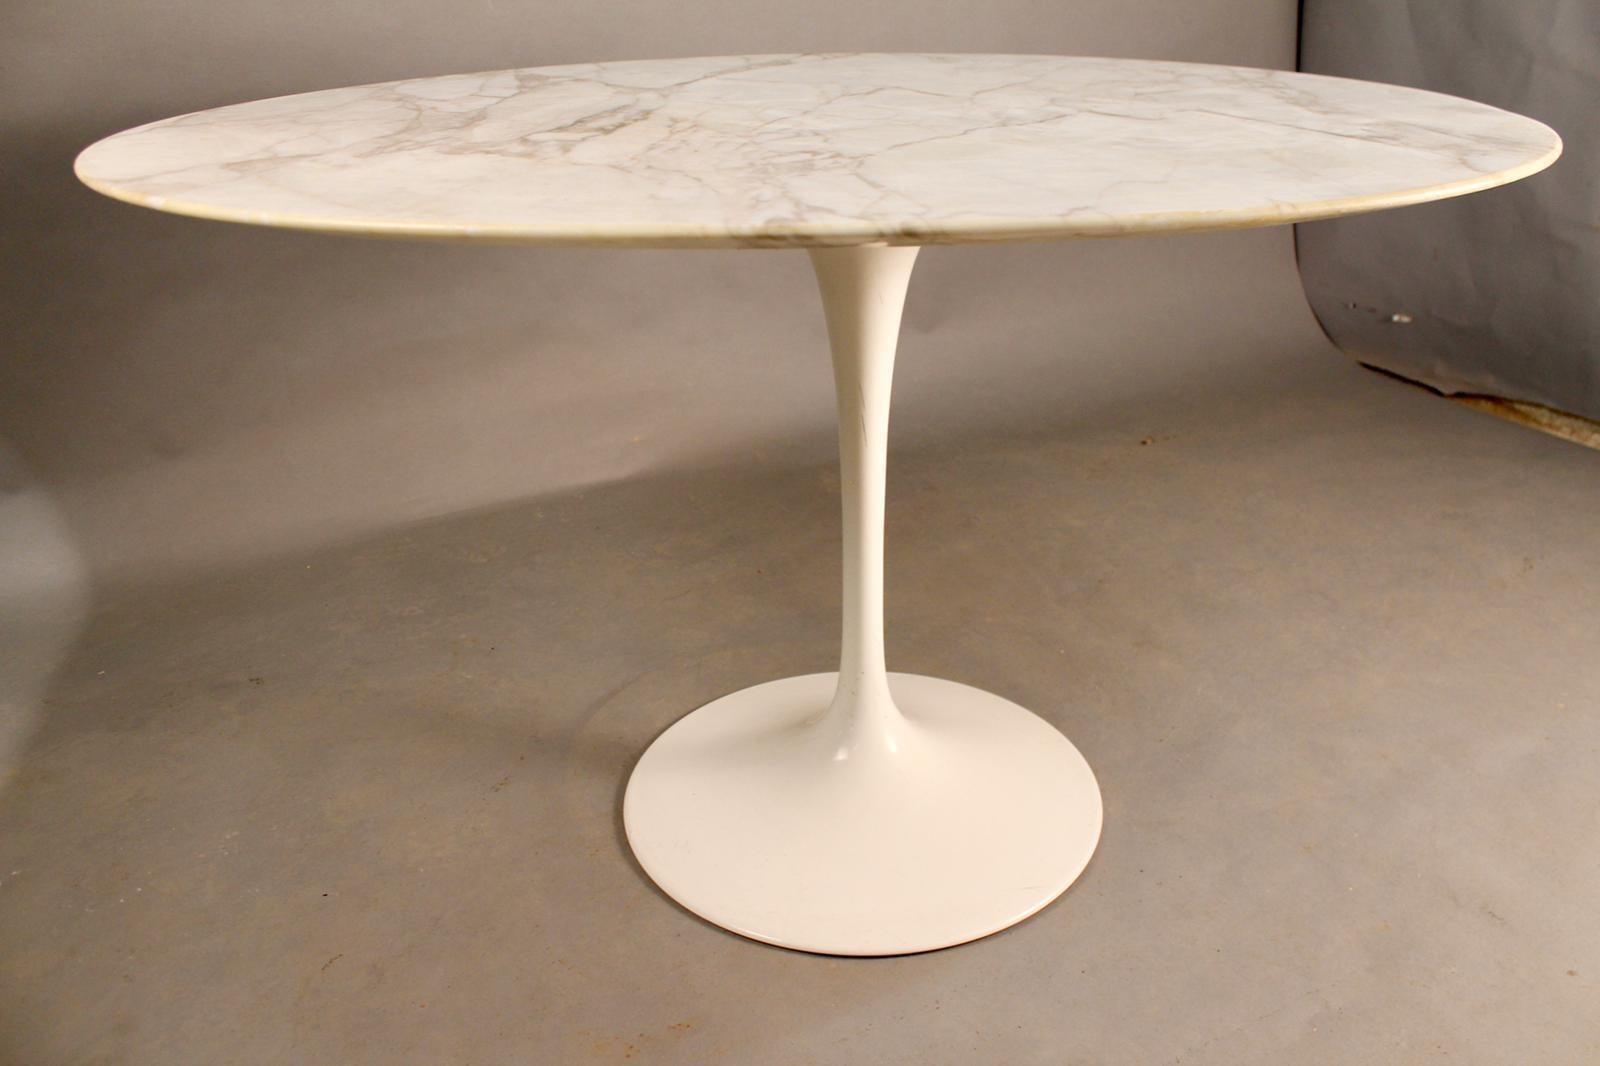 Eero Saarinen (1910-1961) & Knoll International
Tulip, modèle created, 1956.
This set comprising :
Round table, Rilsan sheathed cast aluminum base
-6 Chairs
Measures: 81 x 51 x 44 cm. The tulip chair was designed by Eero Saarinen in 1955 and